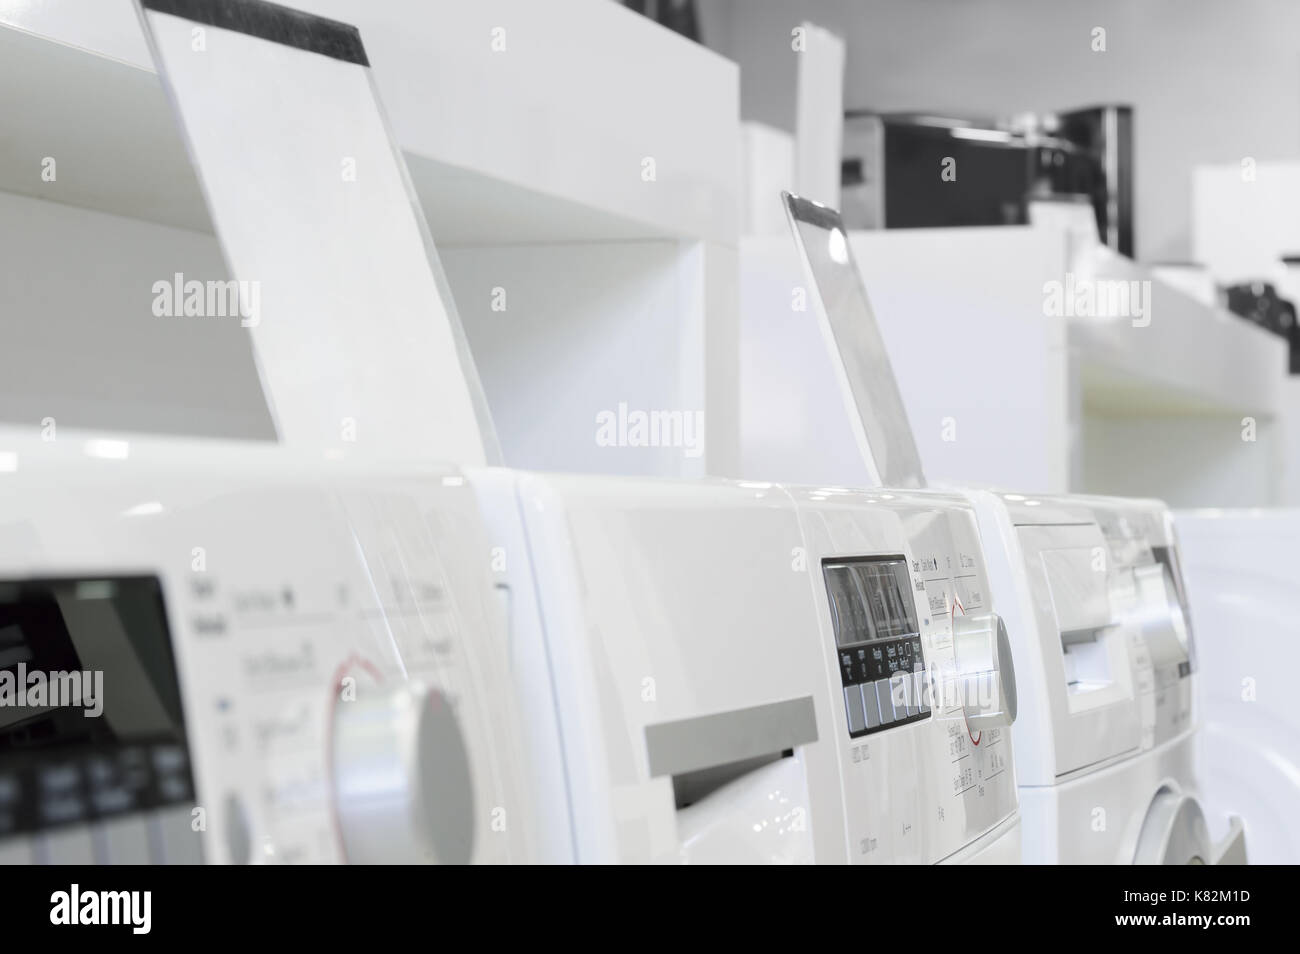 washing machines in appliance store Stock Photo